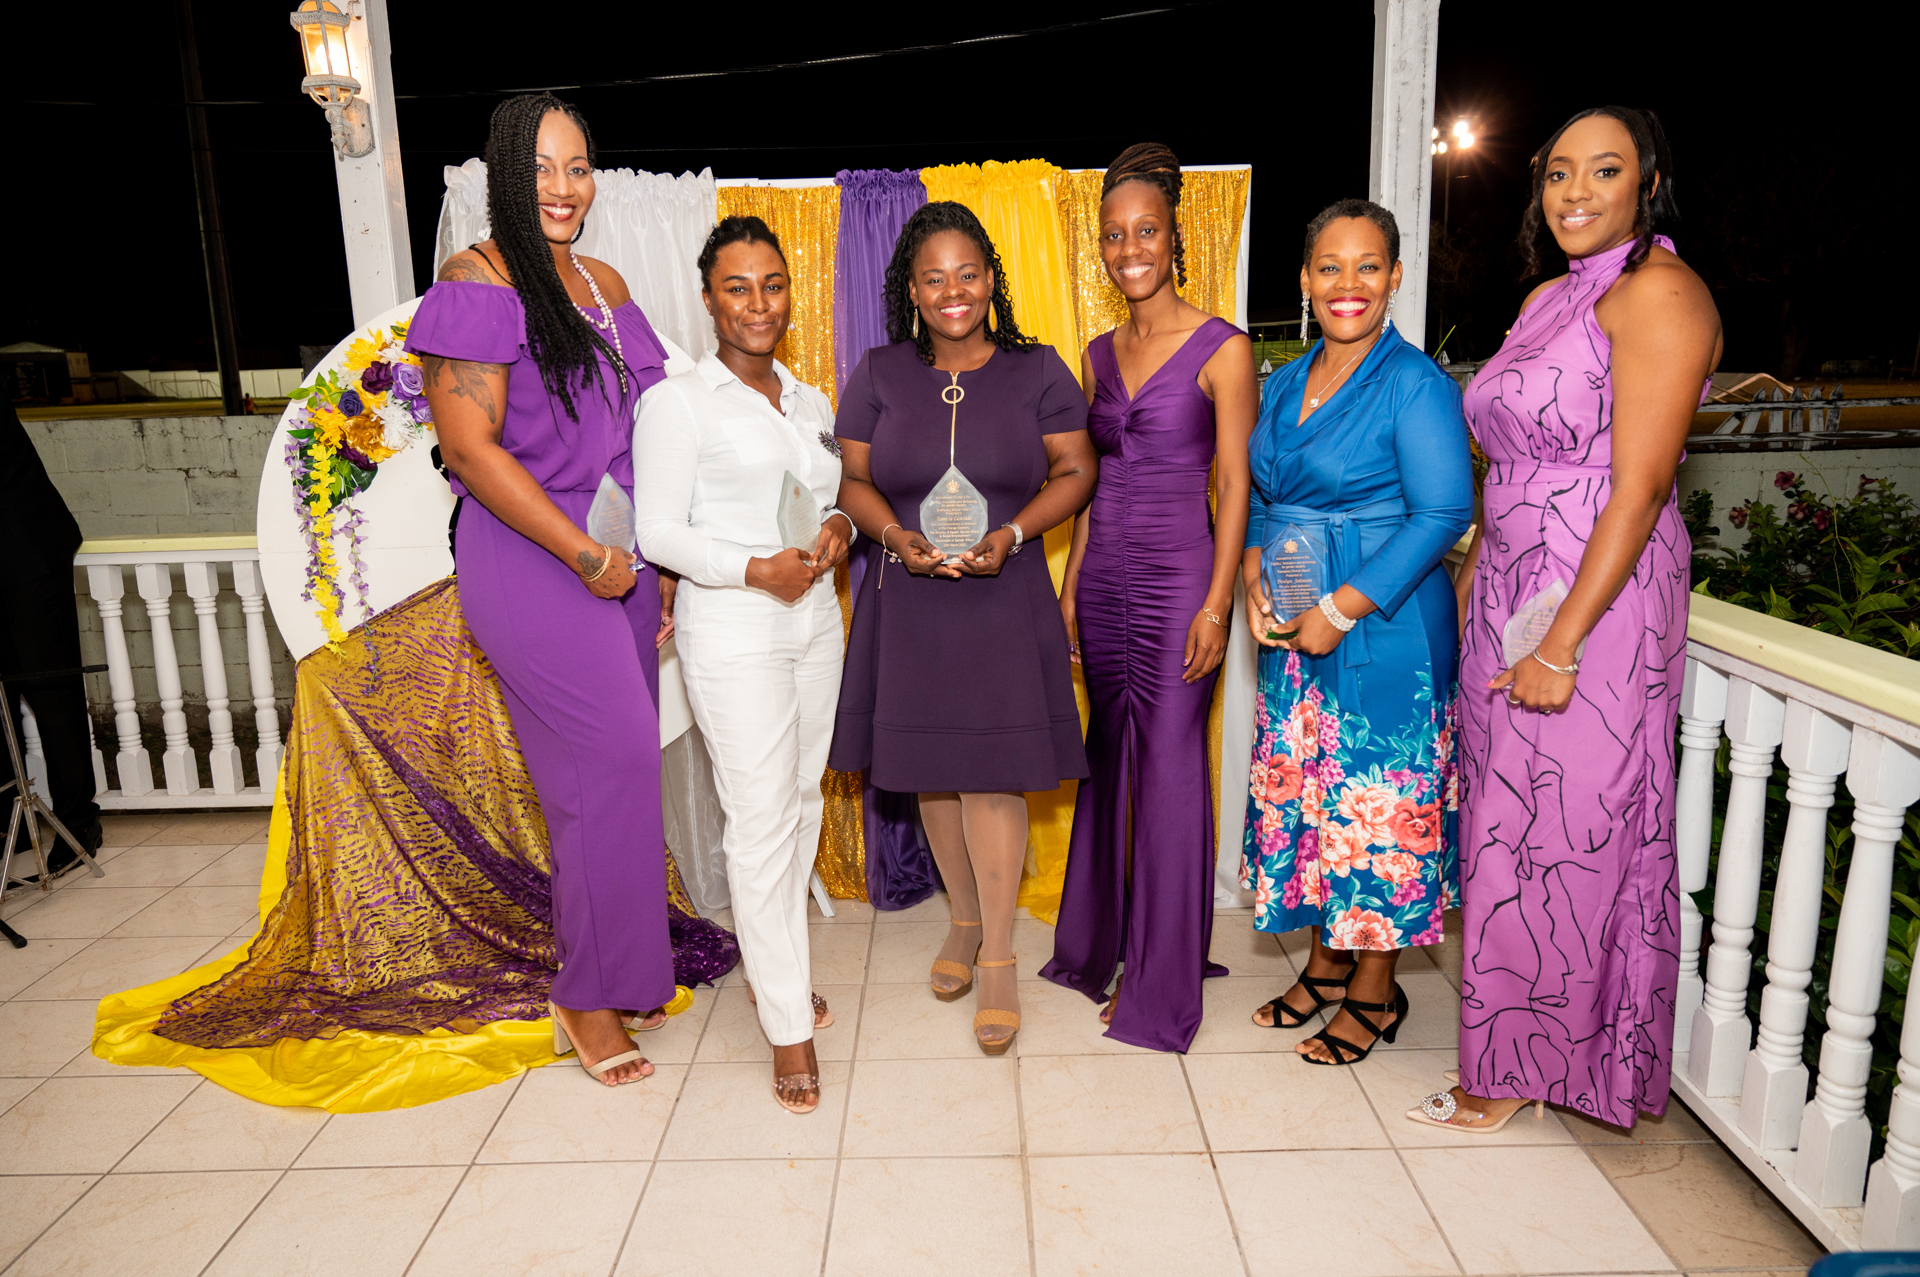 Hon. Jahnel Nisbett, Minister of Gender Affairs and Social Development in the Nevis Island Administration (third from right), recently celebrating at Lyn’s Deli in Charlestown with five of the seven women who were honoured by the Department of Gender Affairs for their contributions in the area of technology on the island (l-r) Dr. Kamara Louisy; Ms. Kenisha Lewis; Mrs. Tamicia Lestrade; Mrs. Deslyn Williams-Johnson; and Ms. Melissa Allen (photo provided)